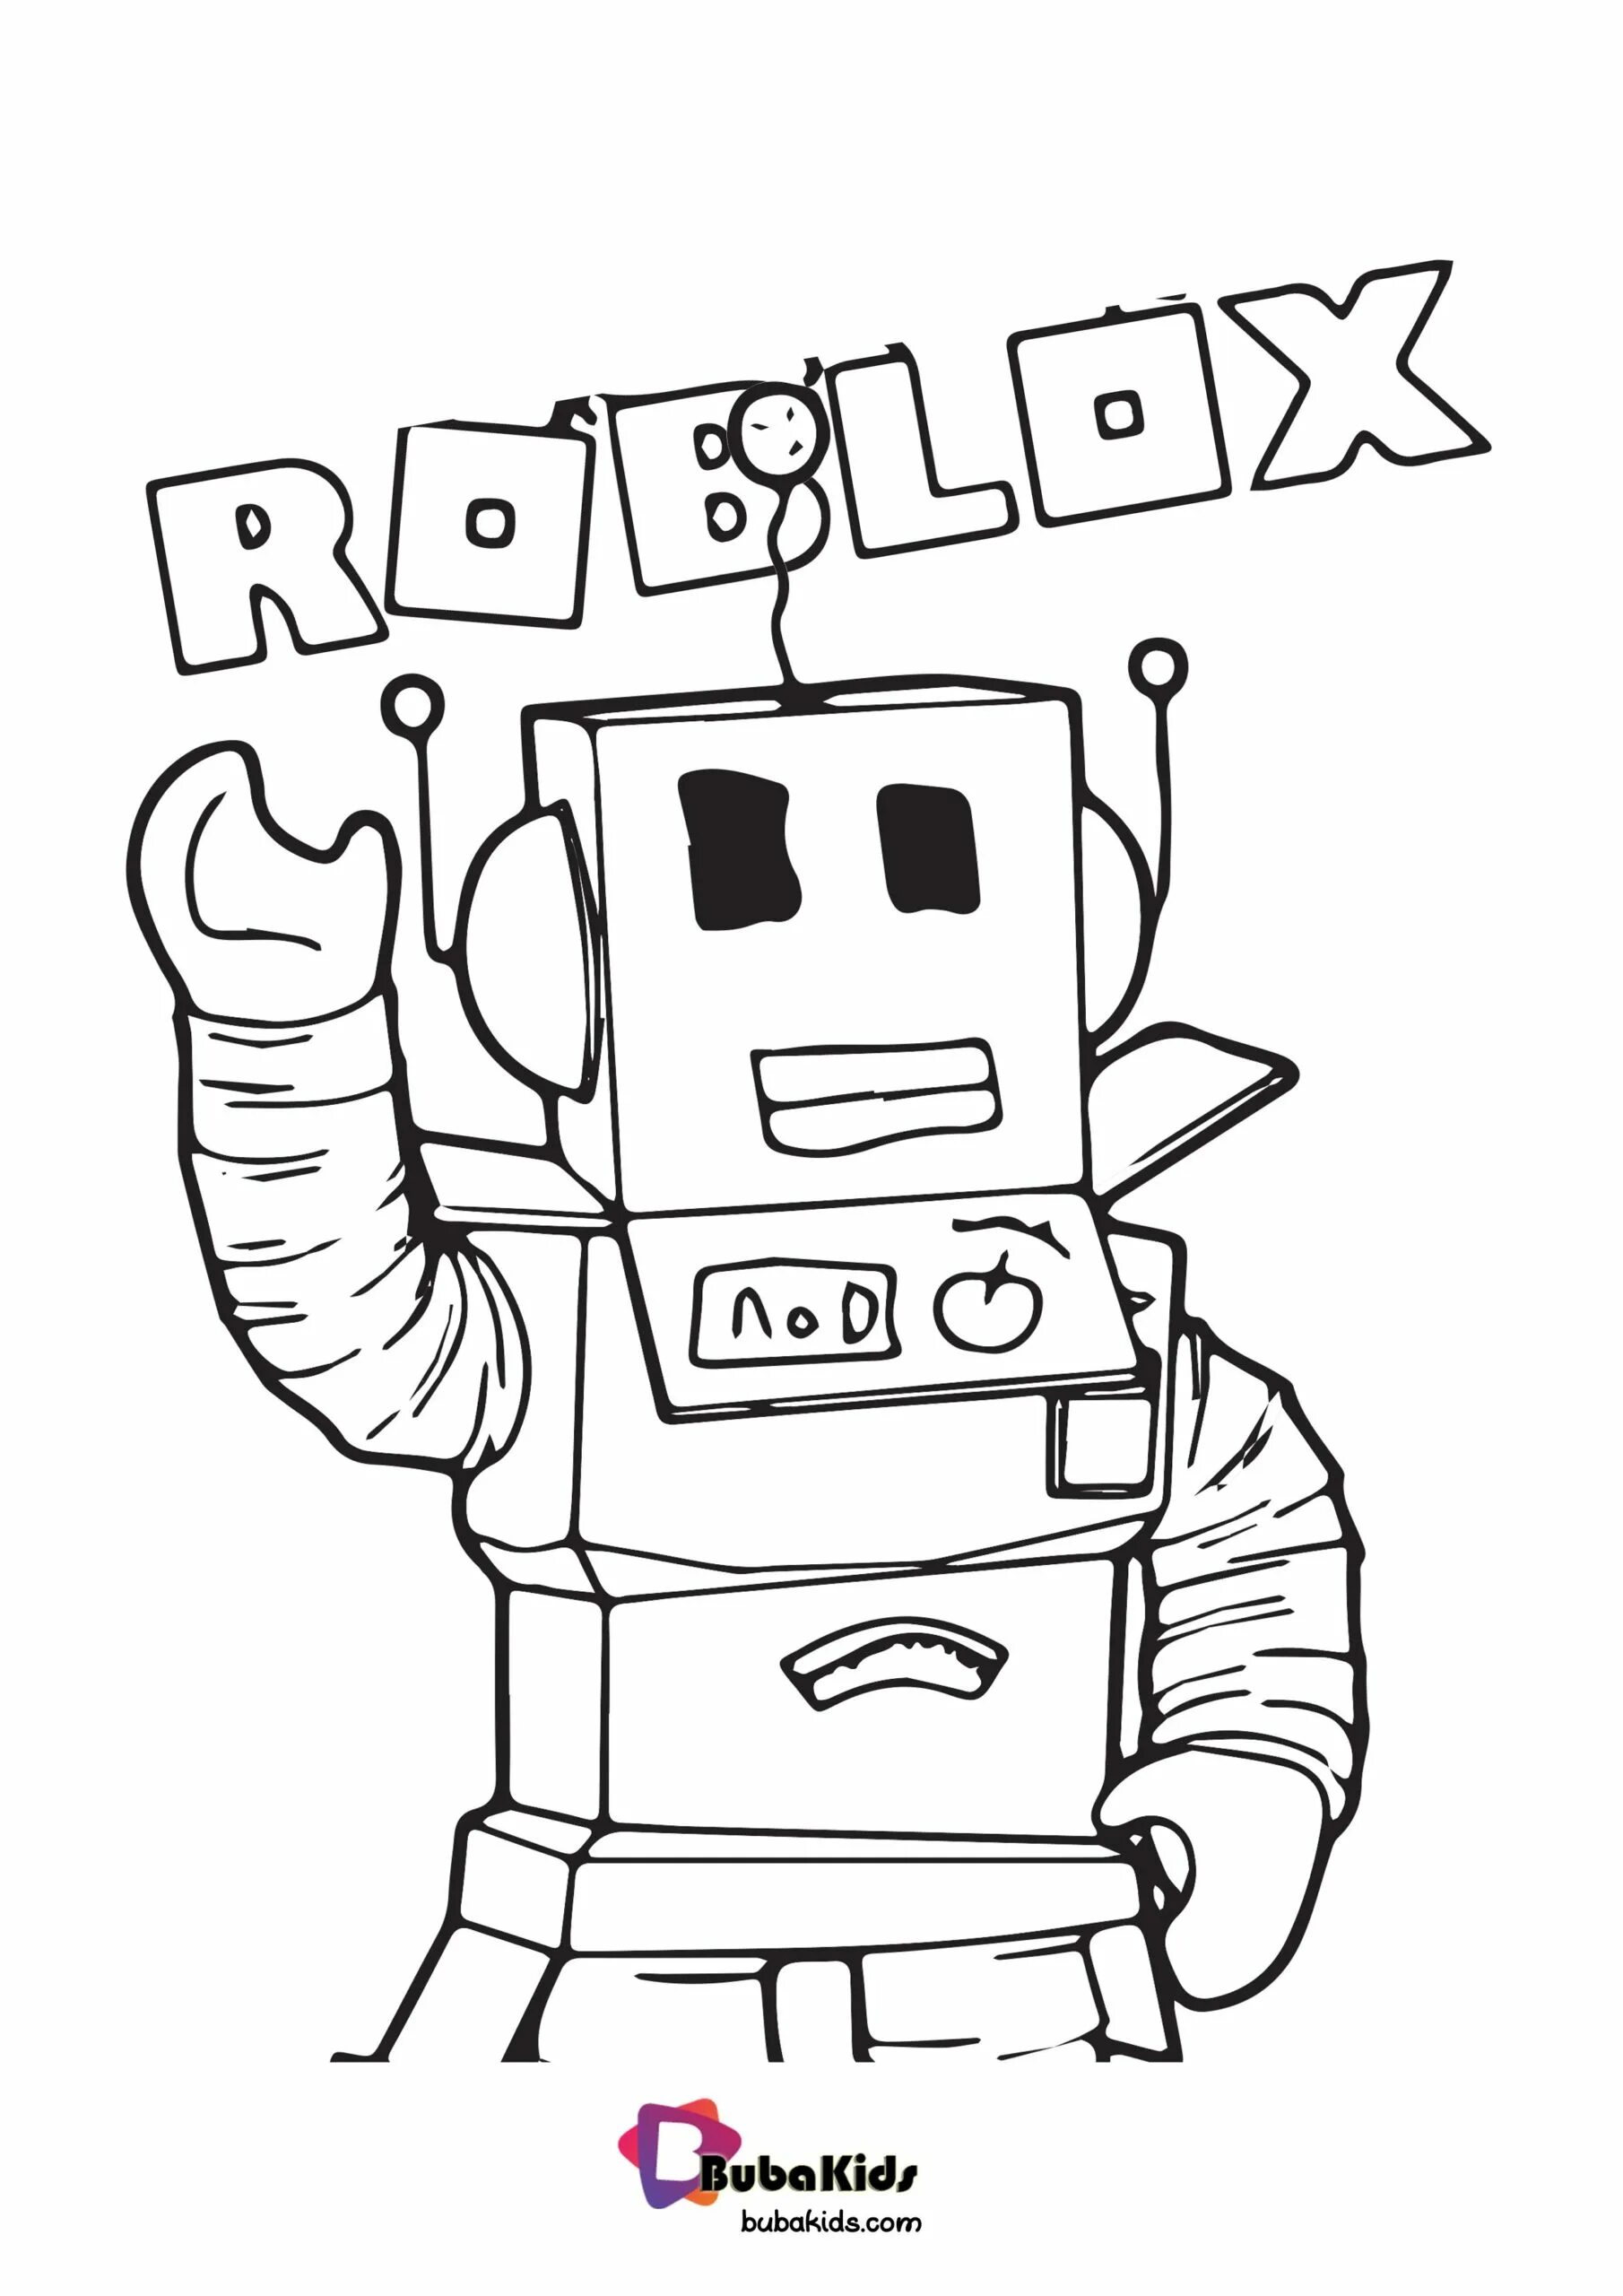 Color-lush roblox brookhaven coloring page